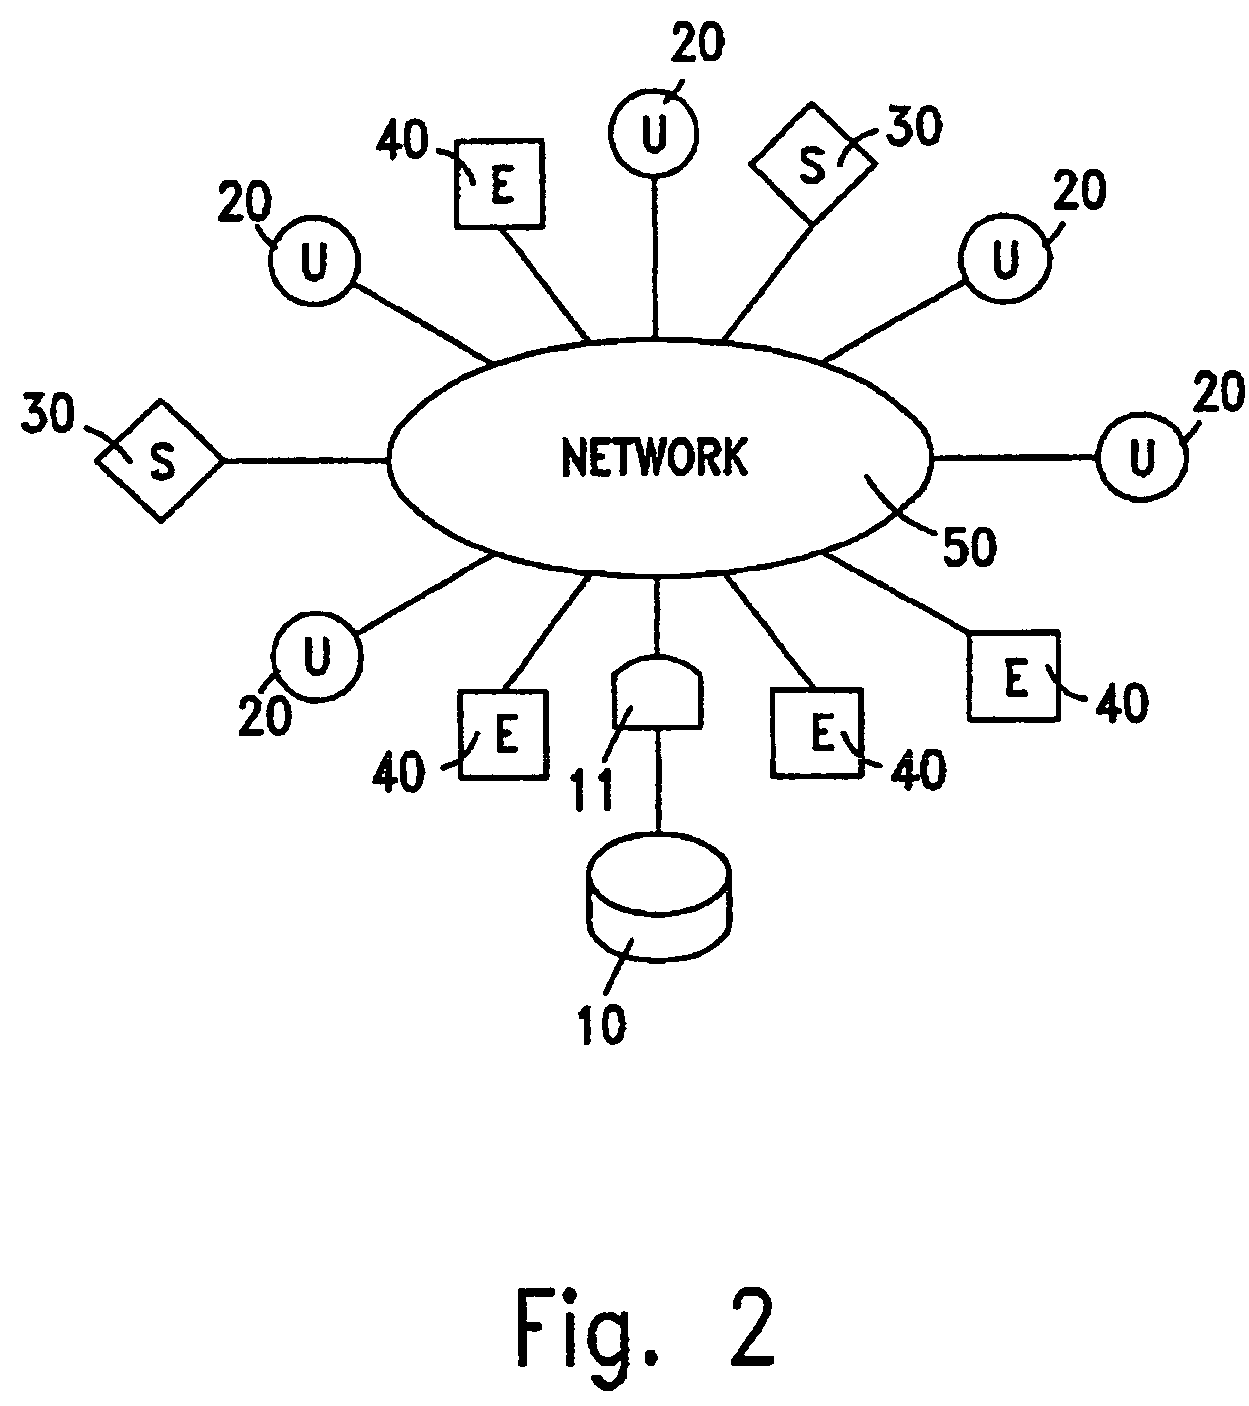 Method and system for sharing knowledge